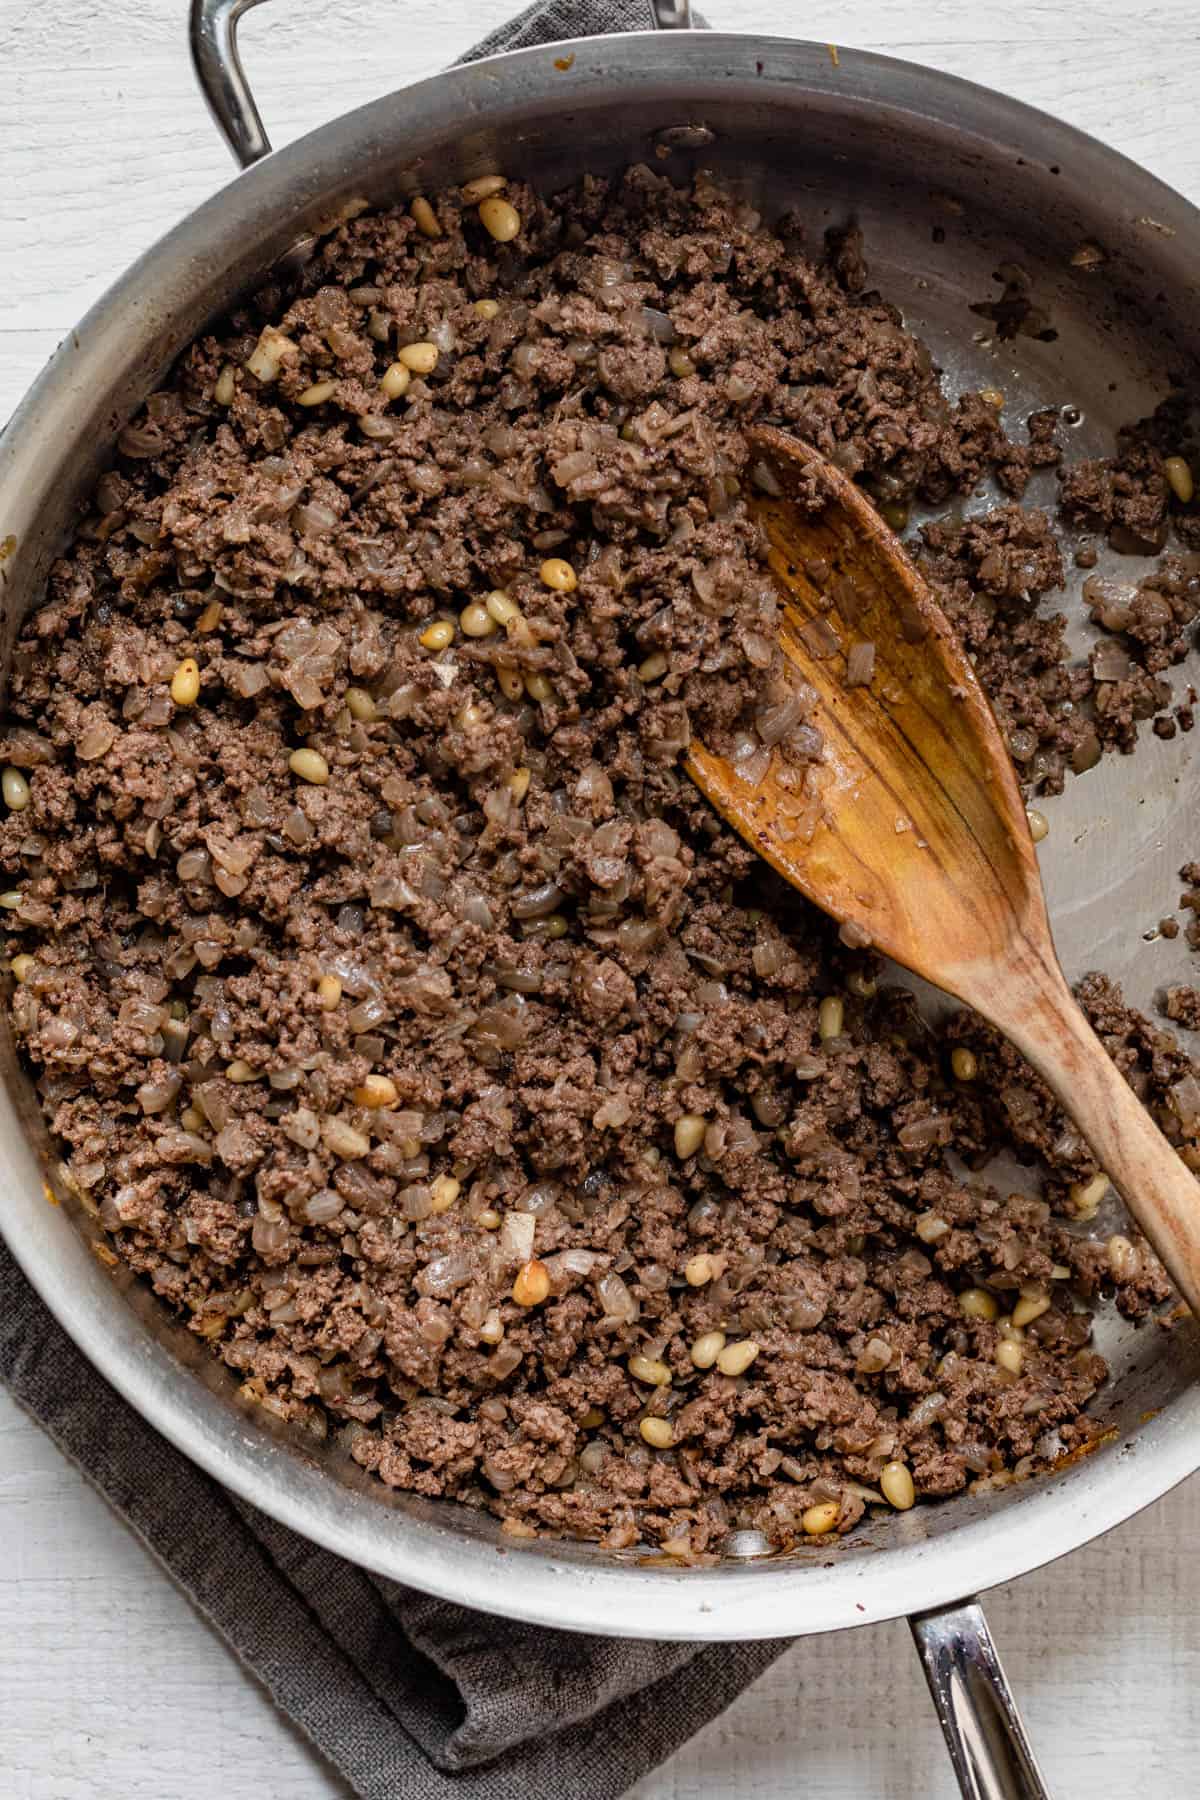 Large pan of cooked ground beef with onions and pine nuts